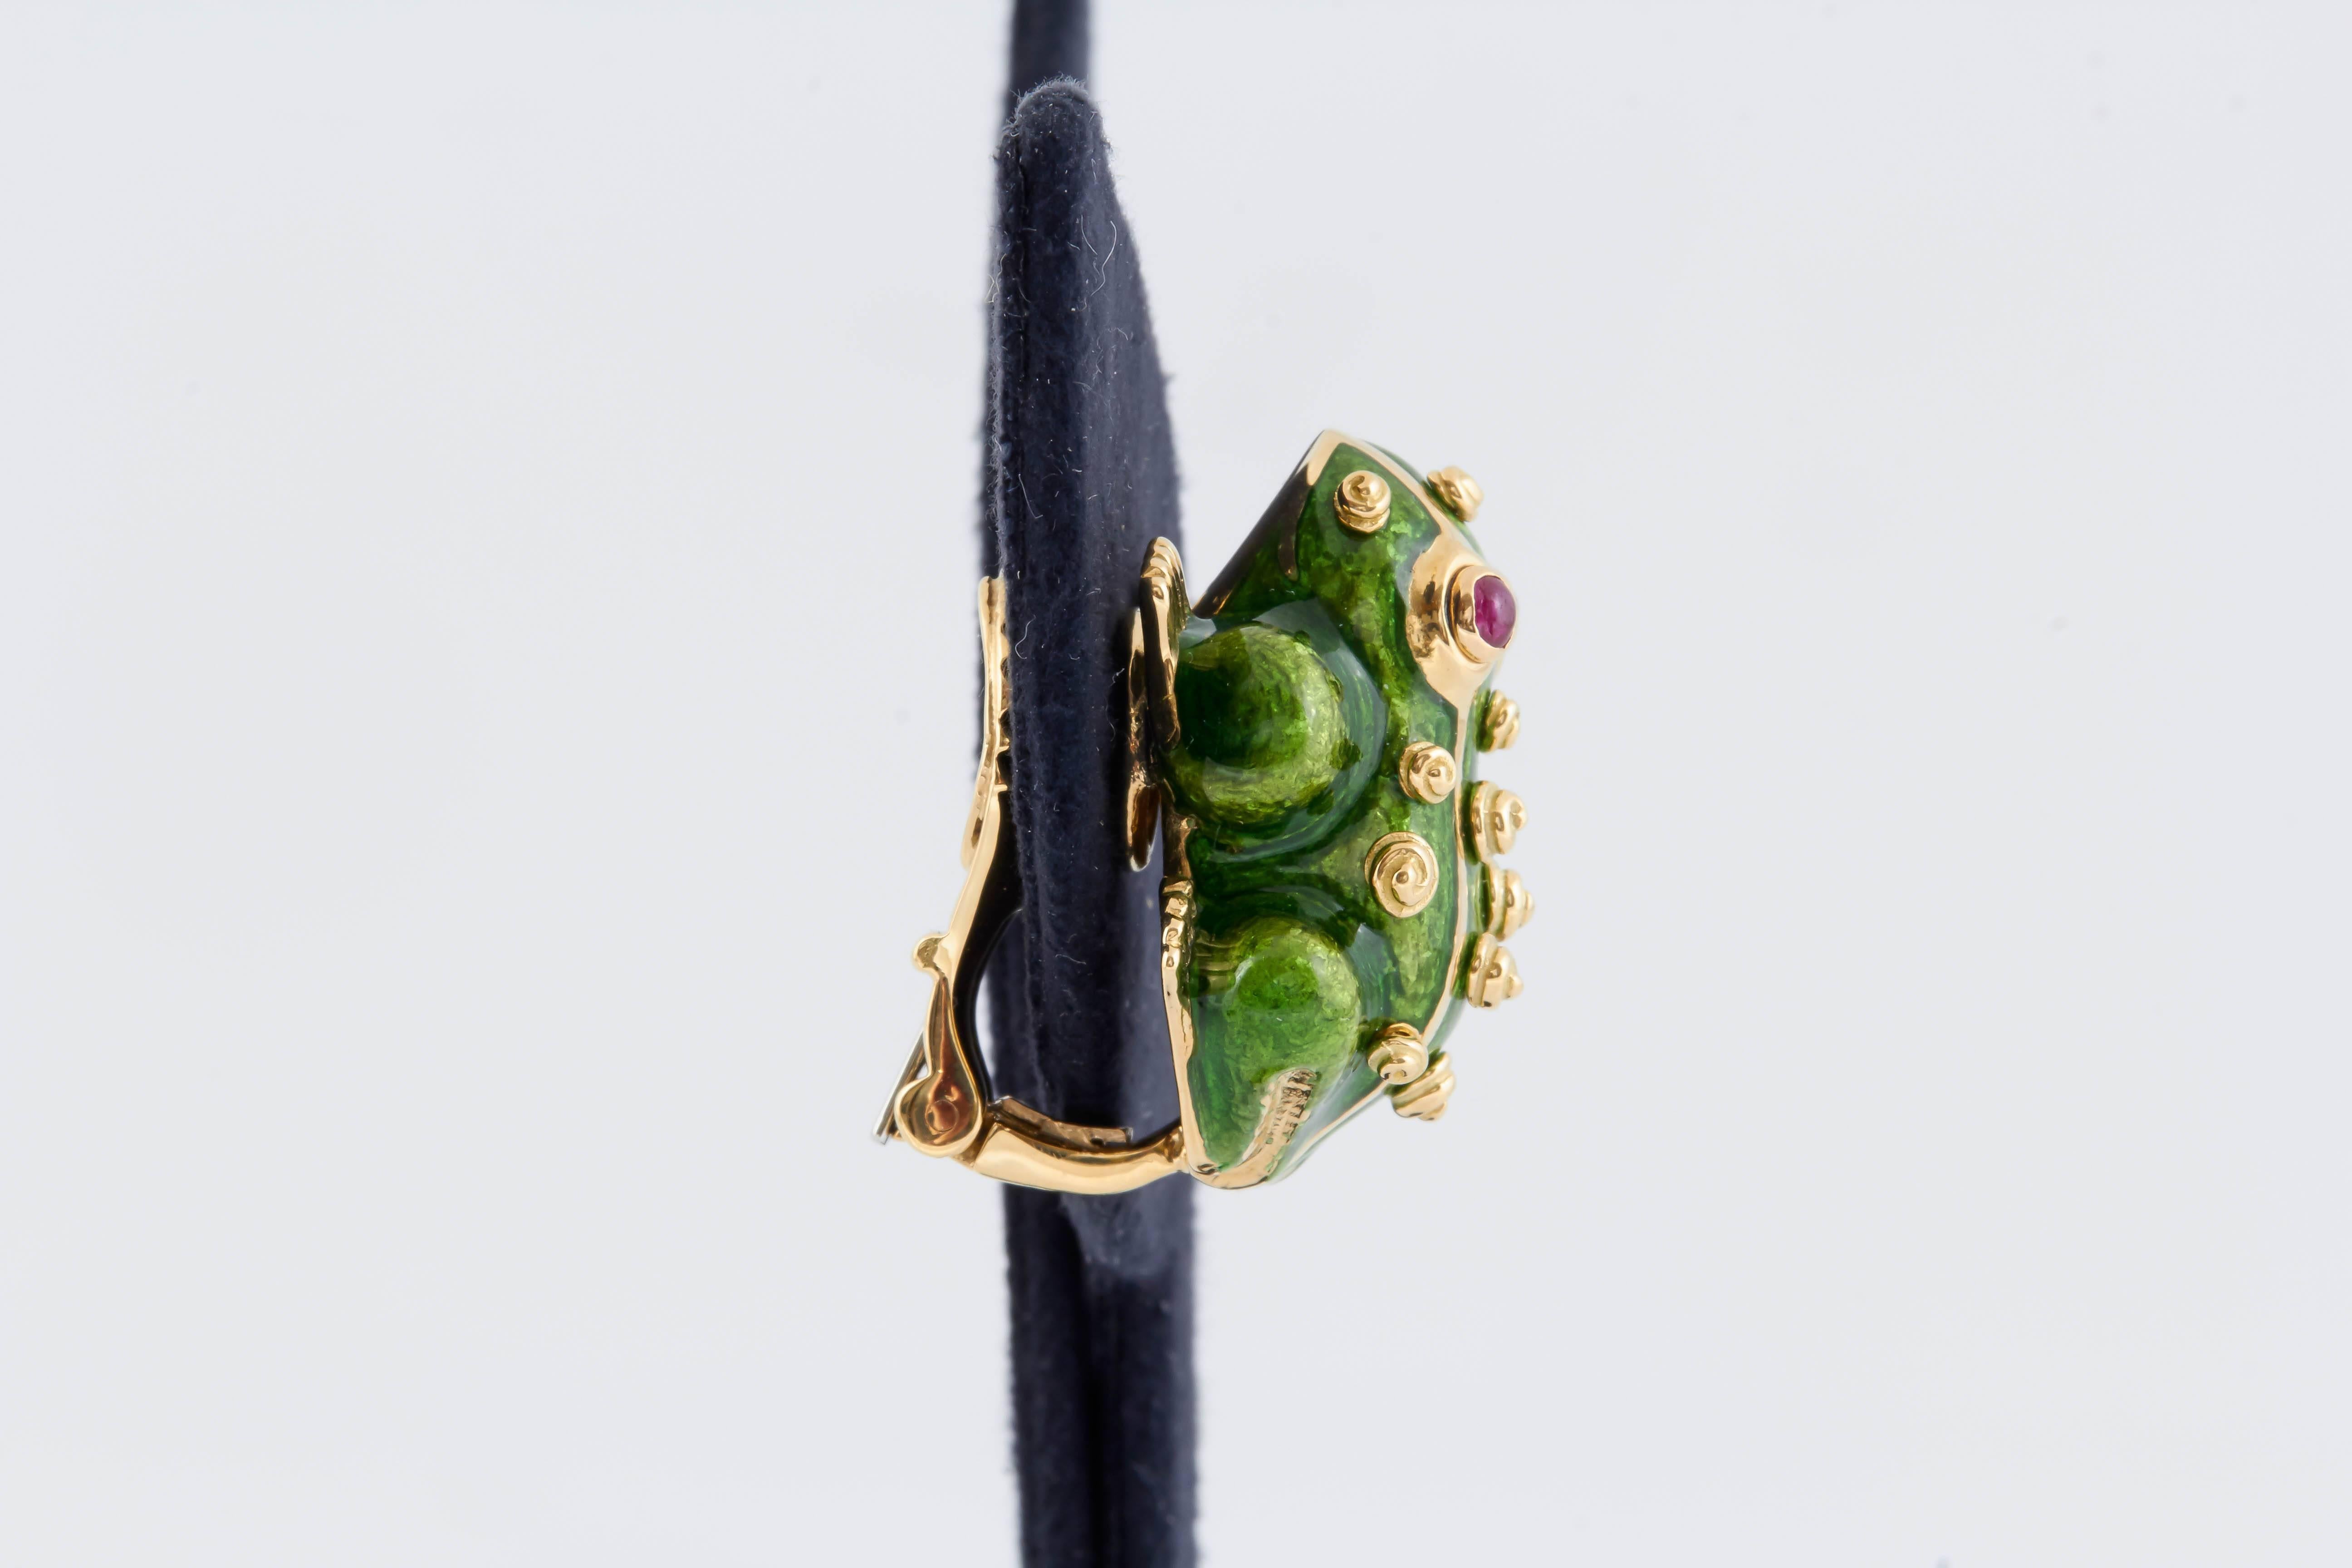 This gorgeous pair of David Webb frog earrings have been finely crafted in 18K yellow gold with a green enamel body that has raised gold "dots" throughout. Oval cabochon cut rubies for eyes accentuate this piece. The backs of the clips are